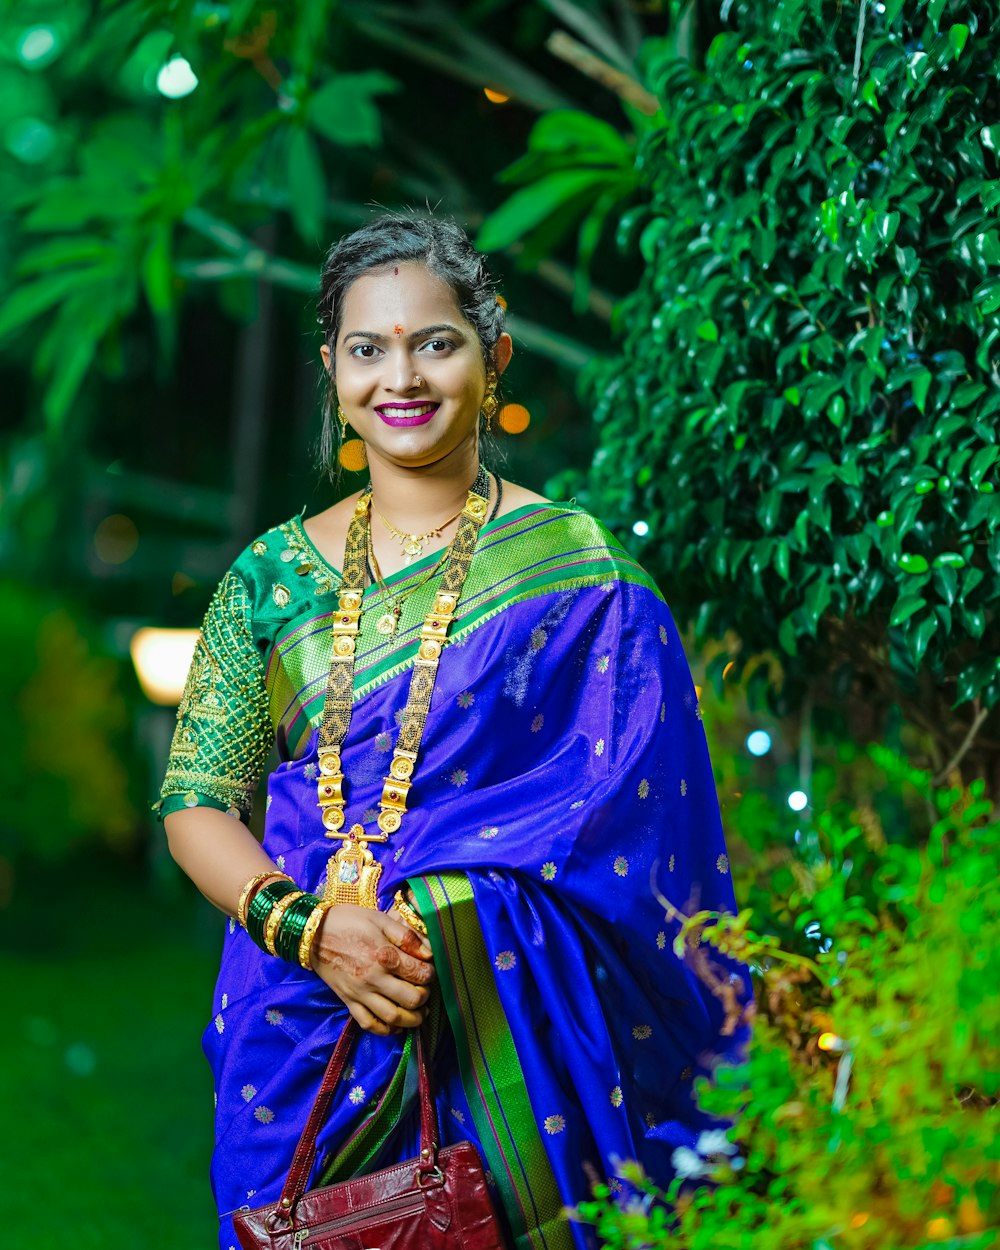 a woman in a blue and green sari